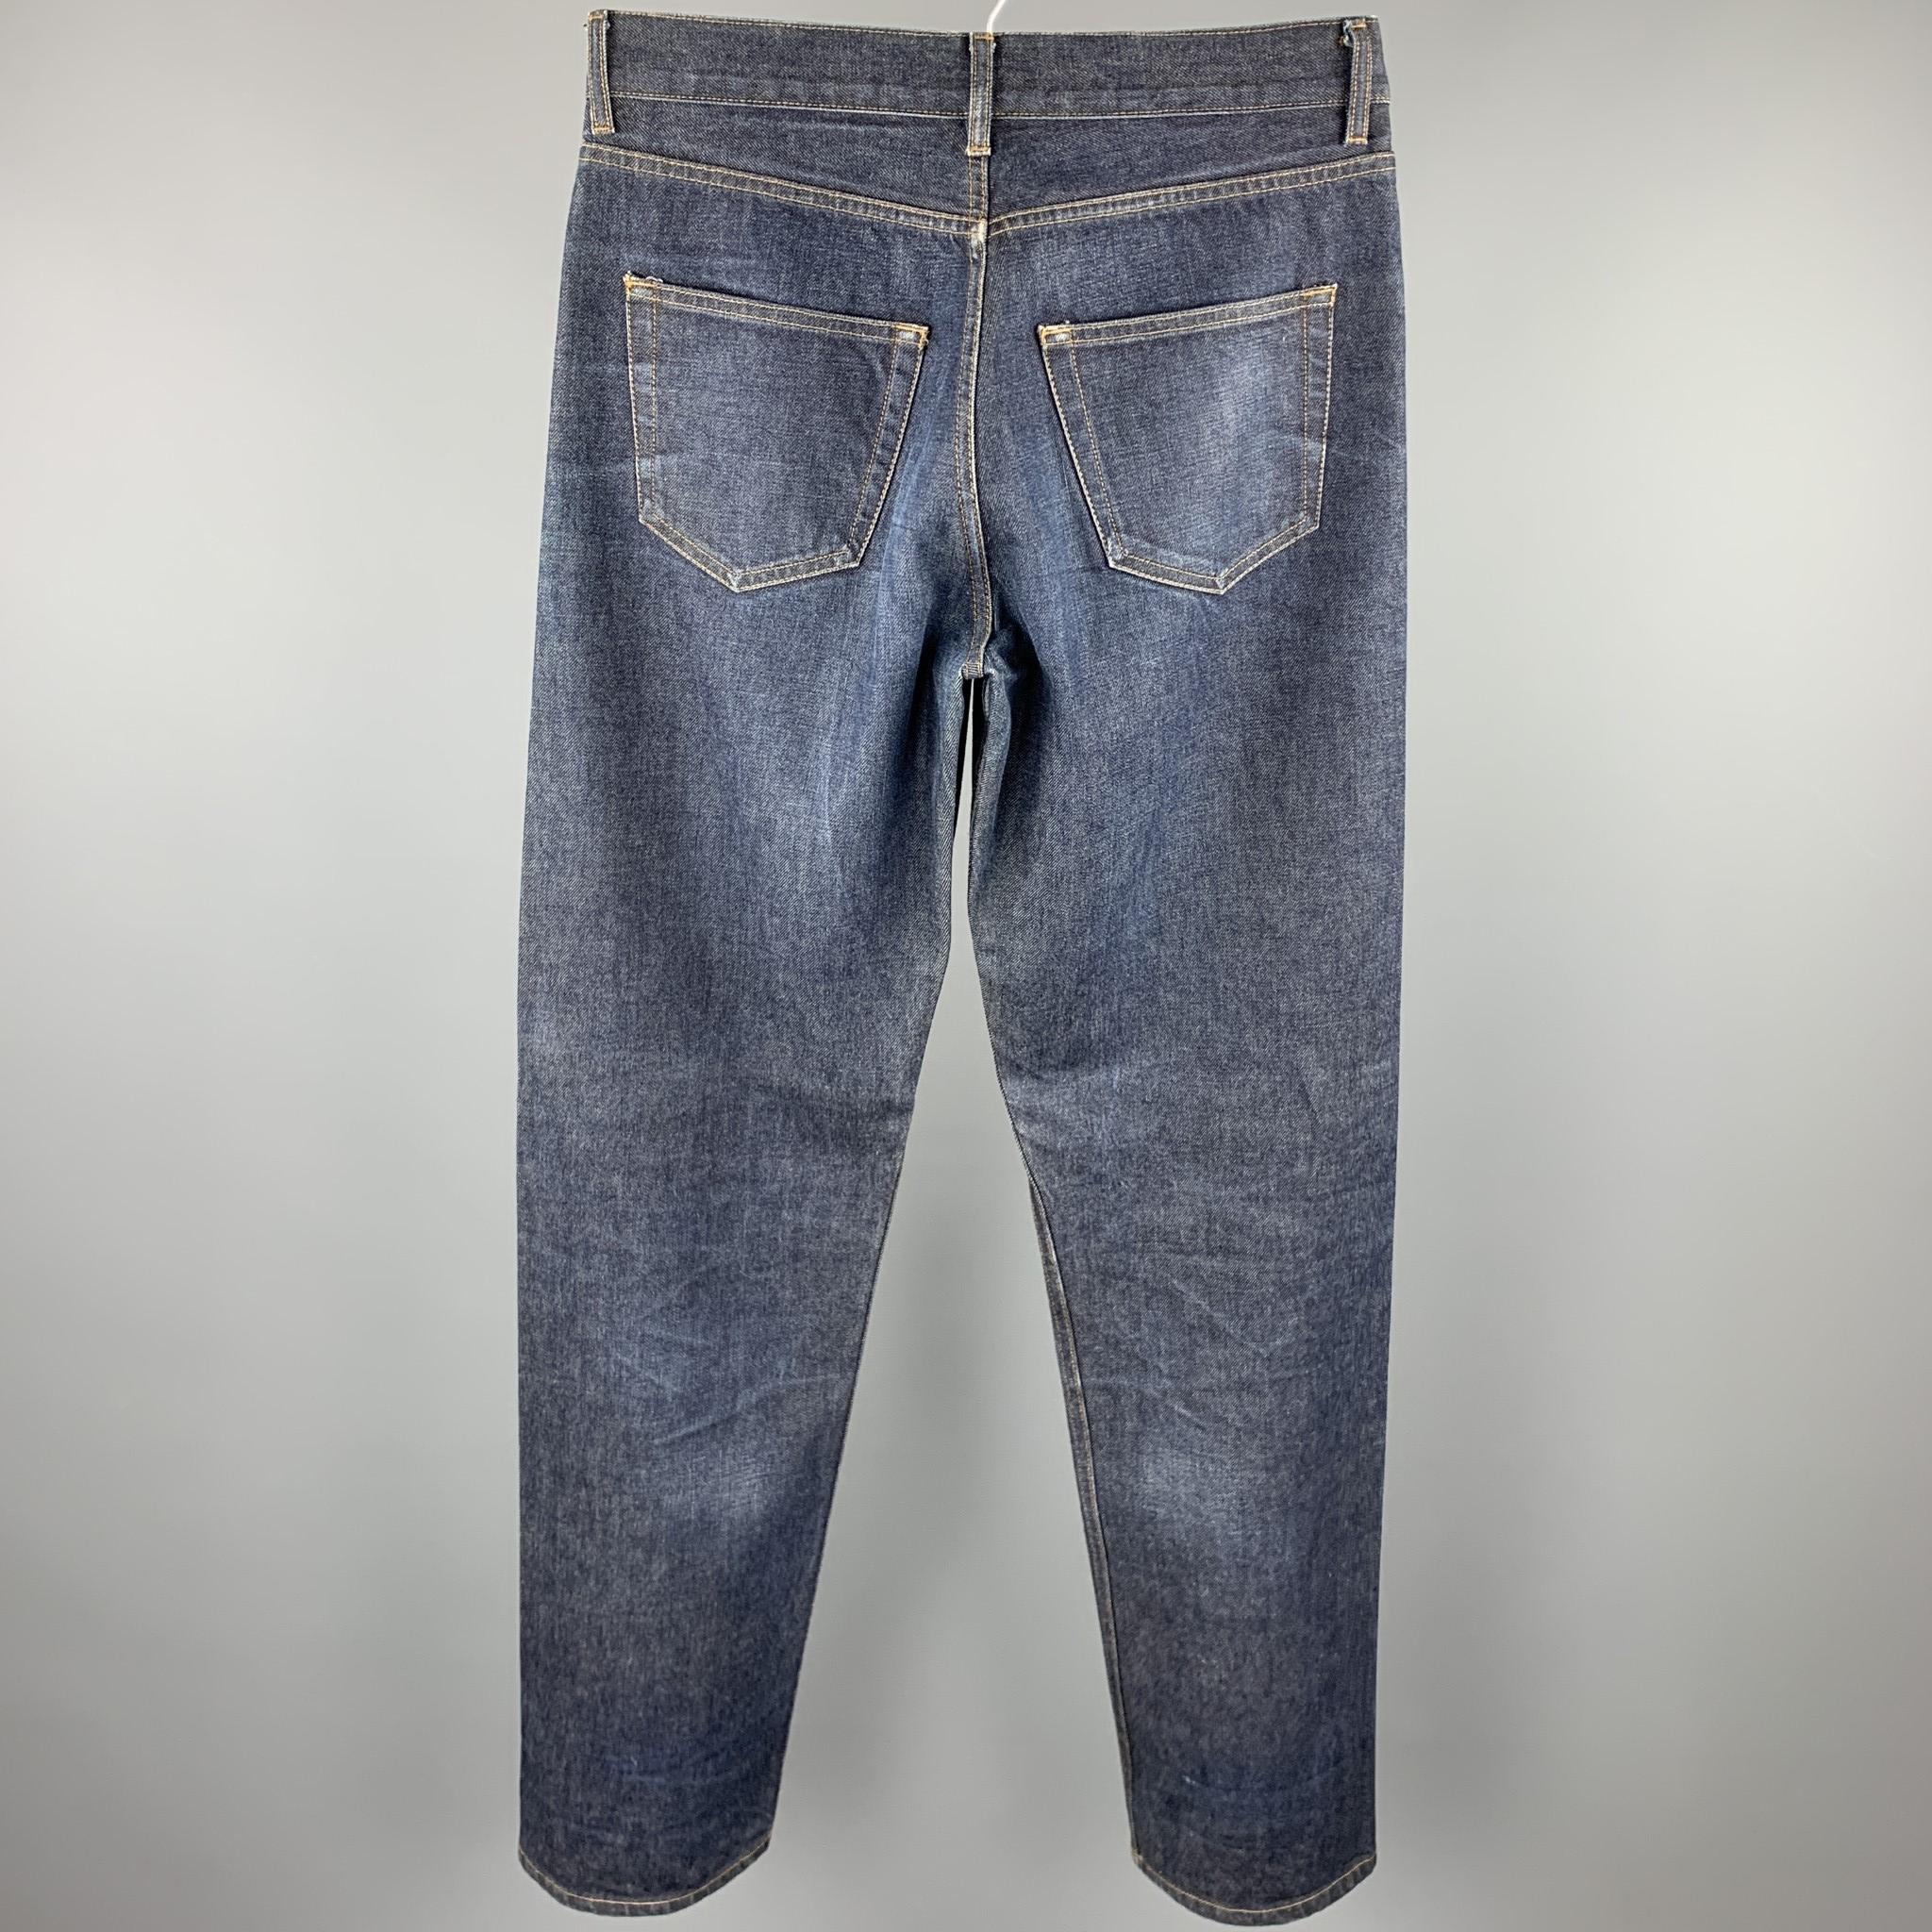 Gray DANIEL CLEARY Size 36 Indigo Wash Selvedge Denim Button Fly Jeans